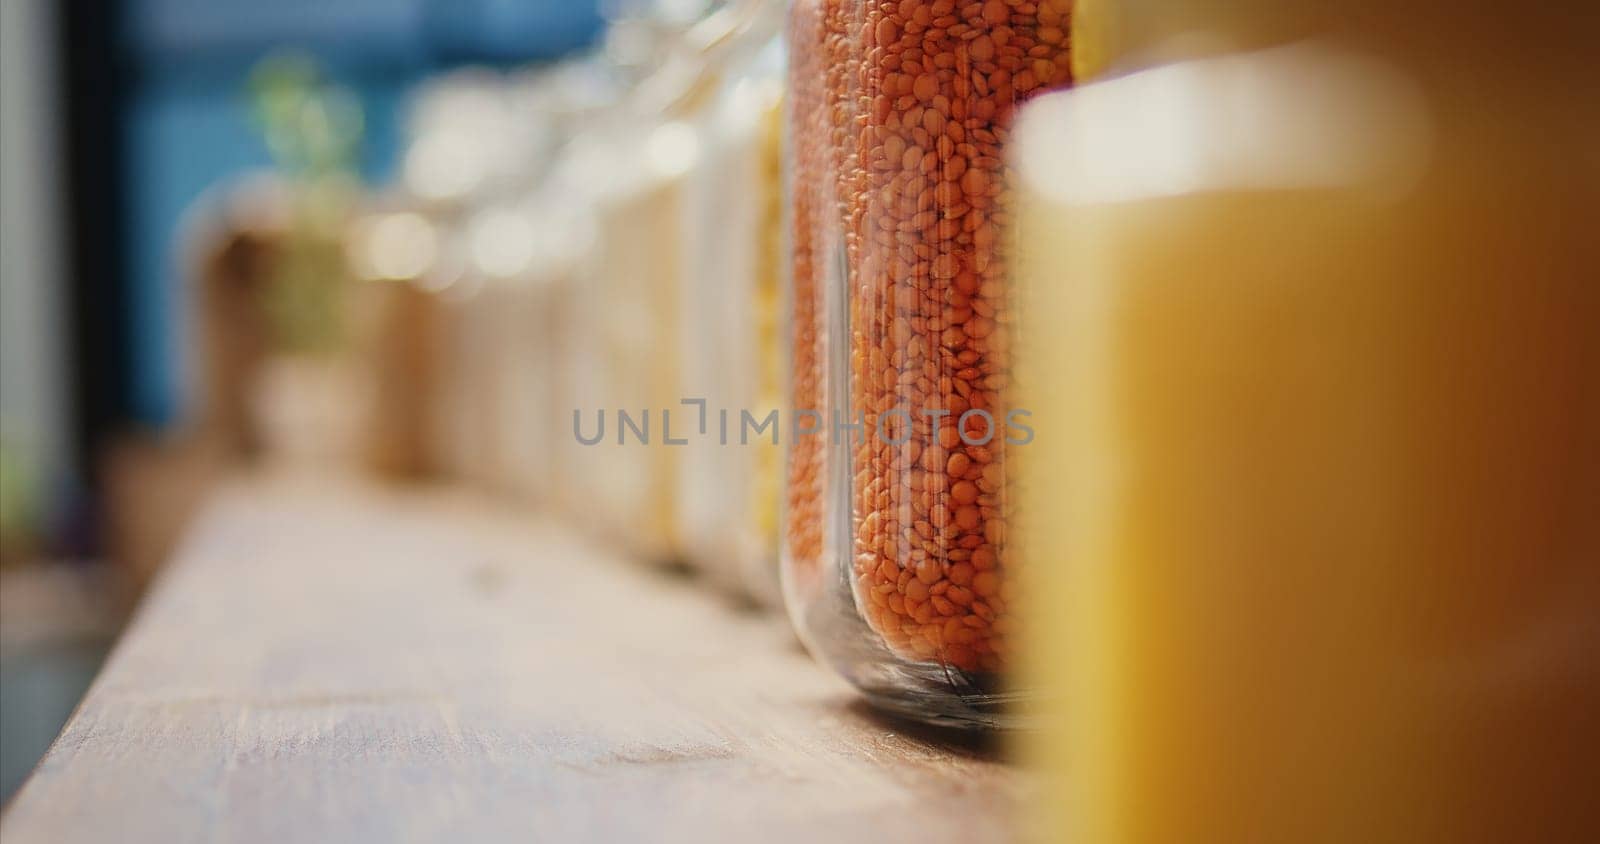 Selective focus of pasta and cereals in glass jars sold as bulk items. Homemade sauces or spices and organic farming produce placed on store shelves, nonpolluting goods. Tripod shot. Close up.